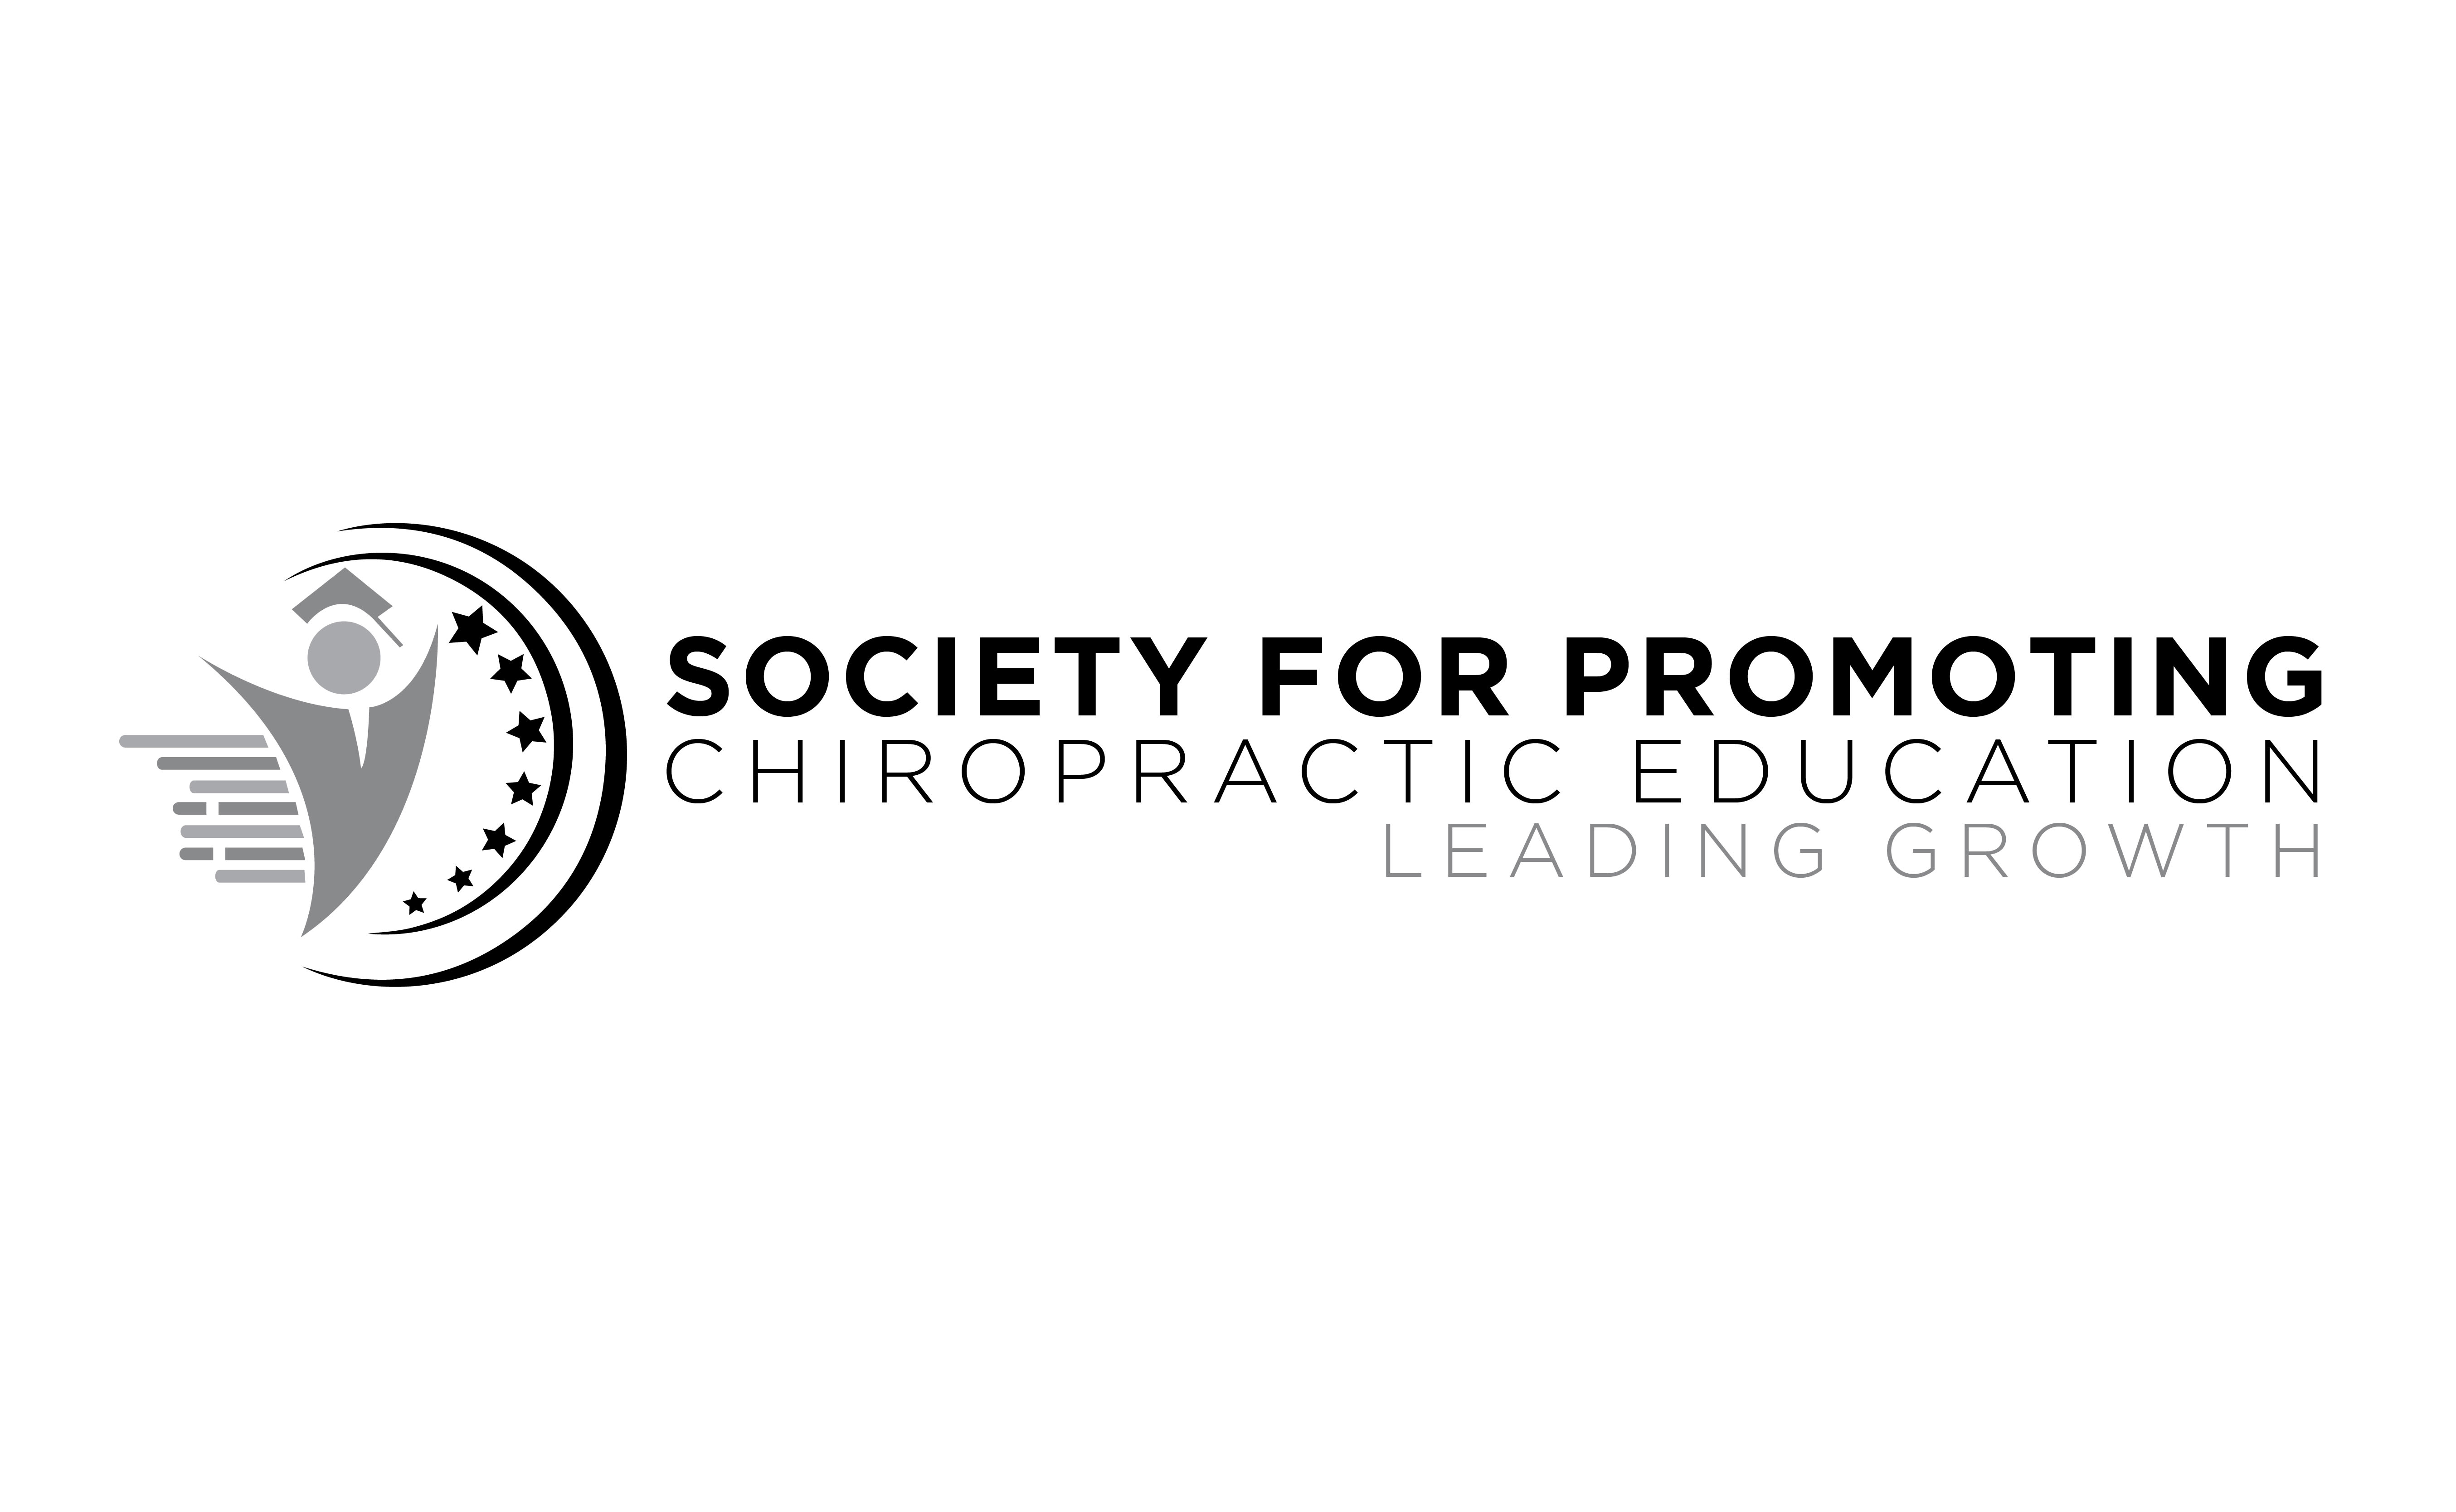 Society for Promoting Chiropractic Education